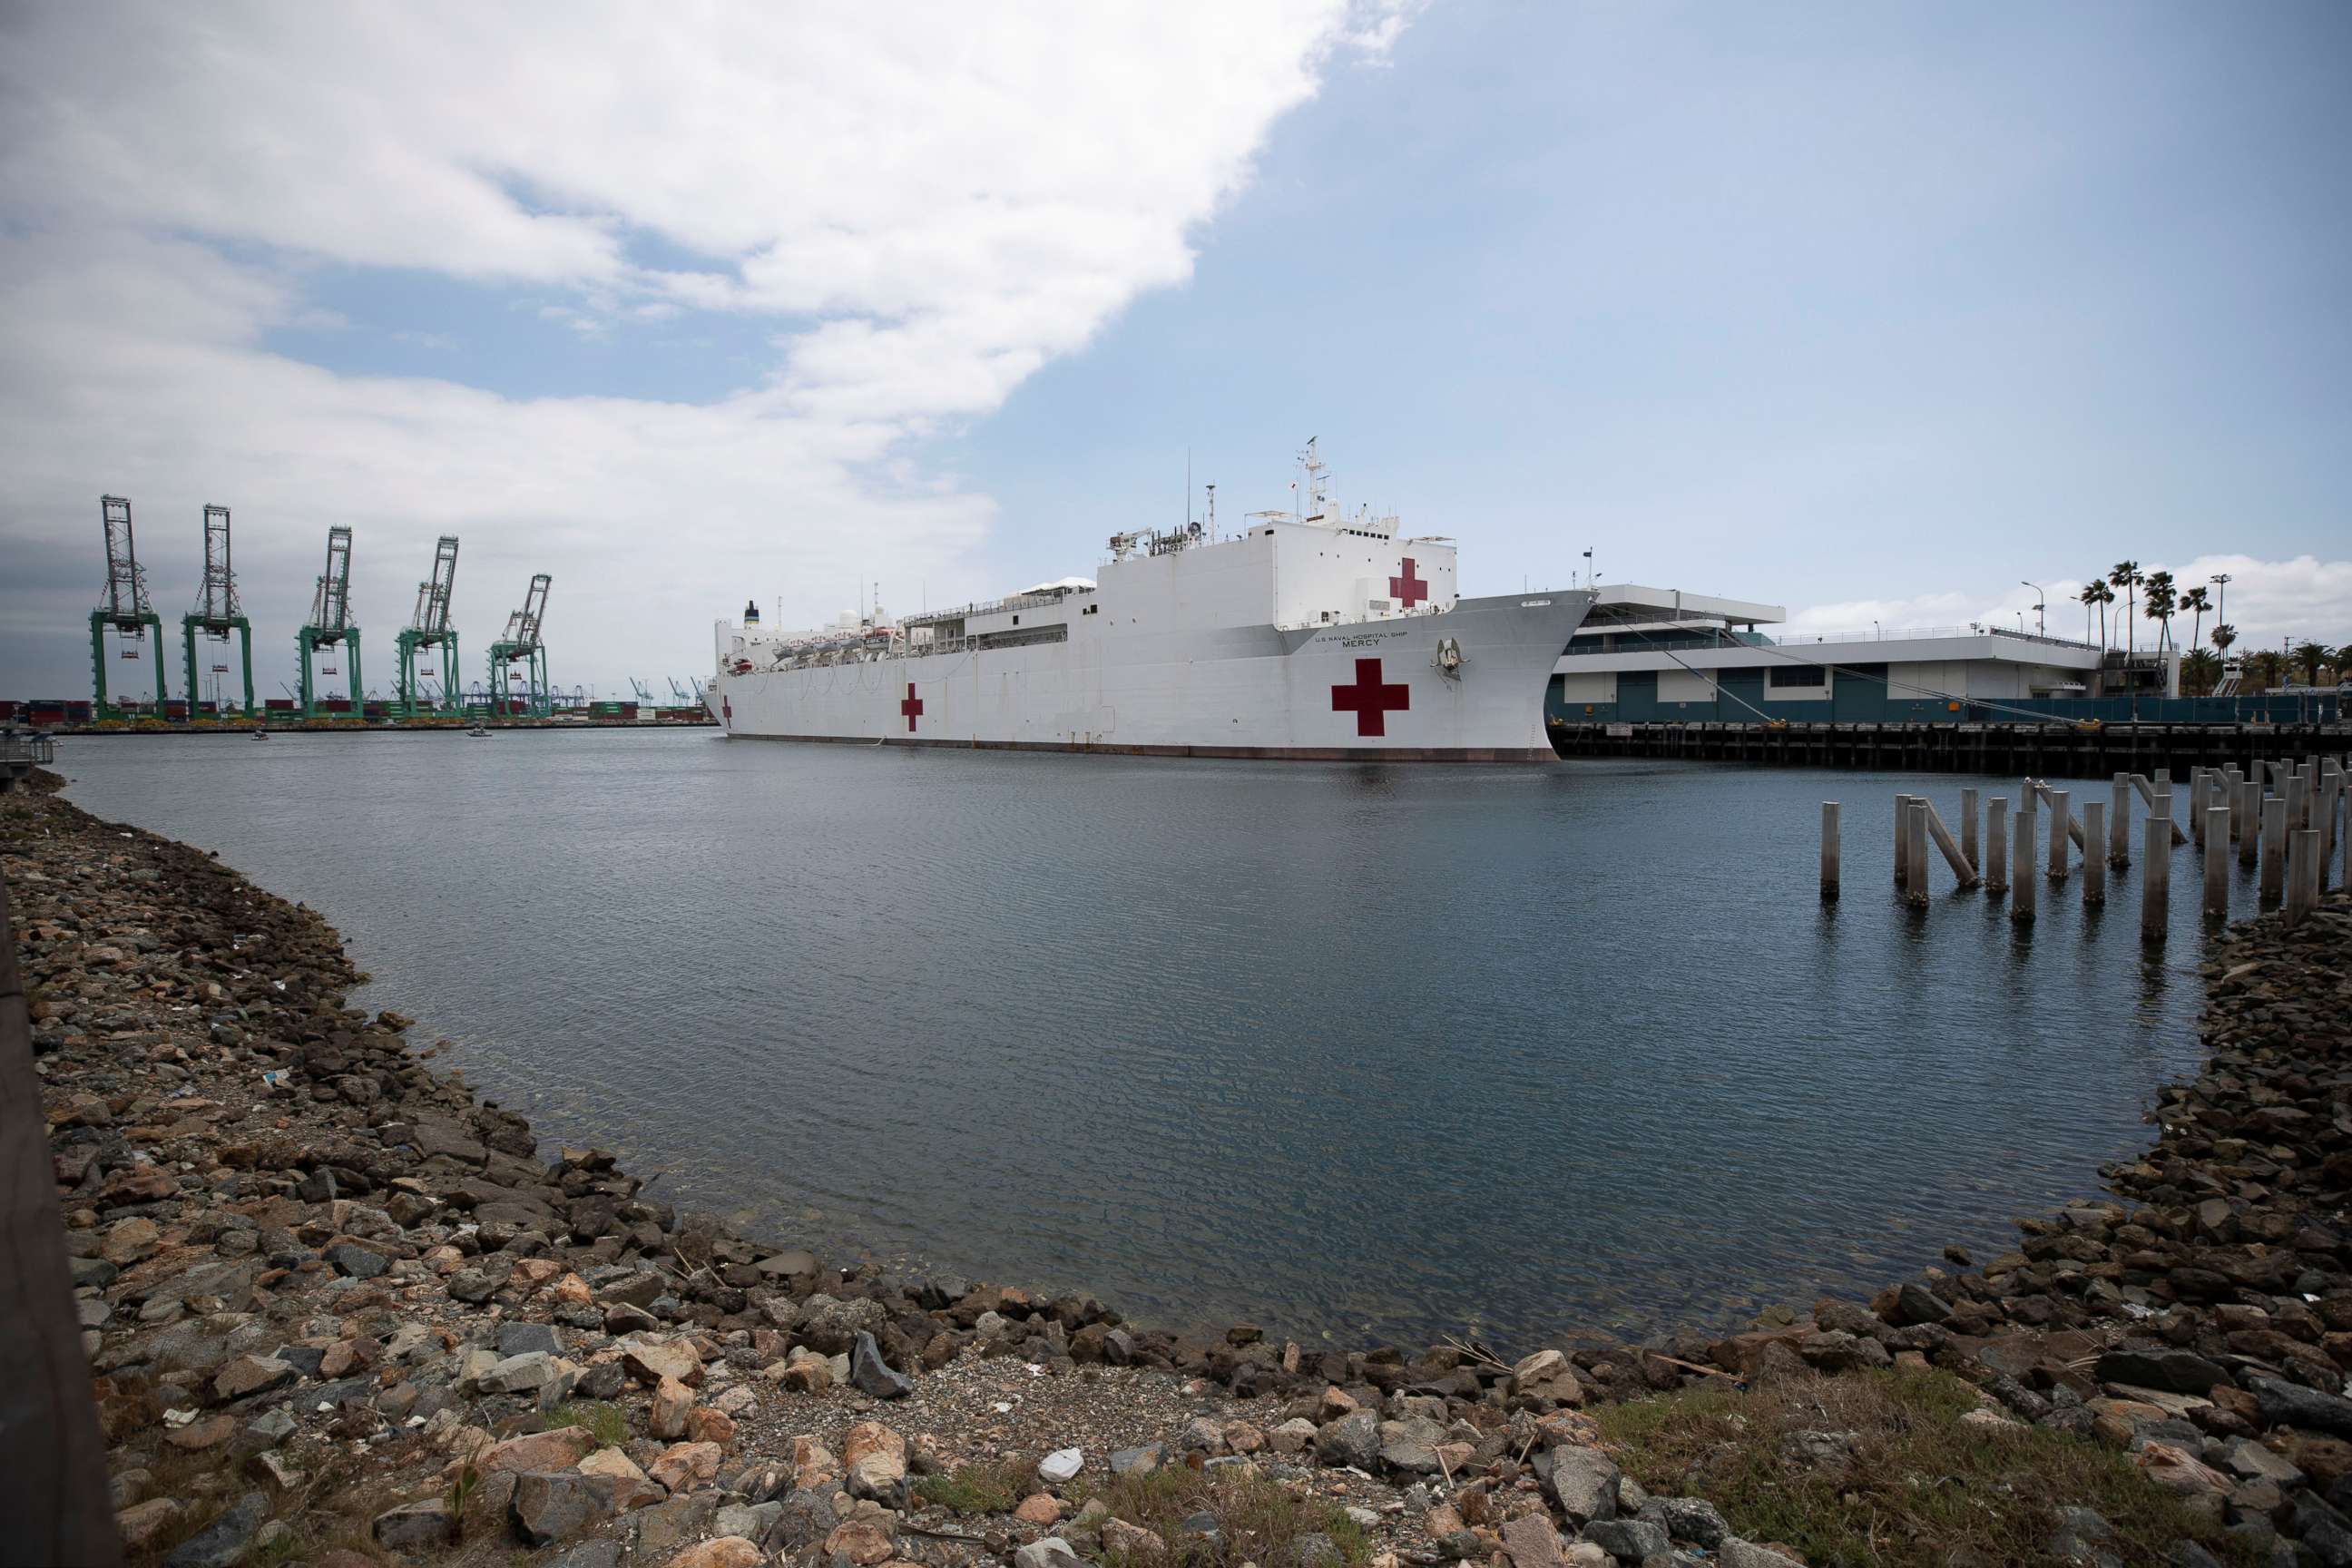 PHOTO: The USNS Mercy hospital ship is docked at the Port of Los Angeles during the global pandemic of the novel coronavirus, in Los Angeles, California, U.S., April 13, 2020.